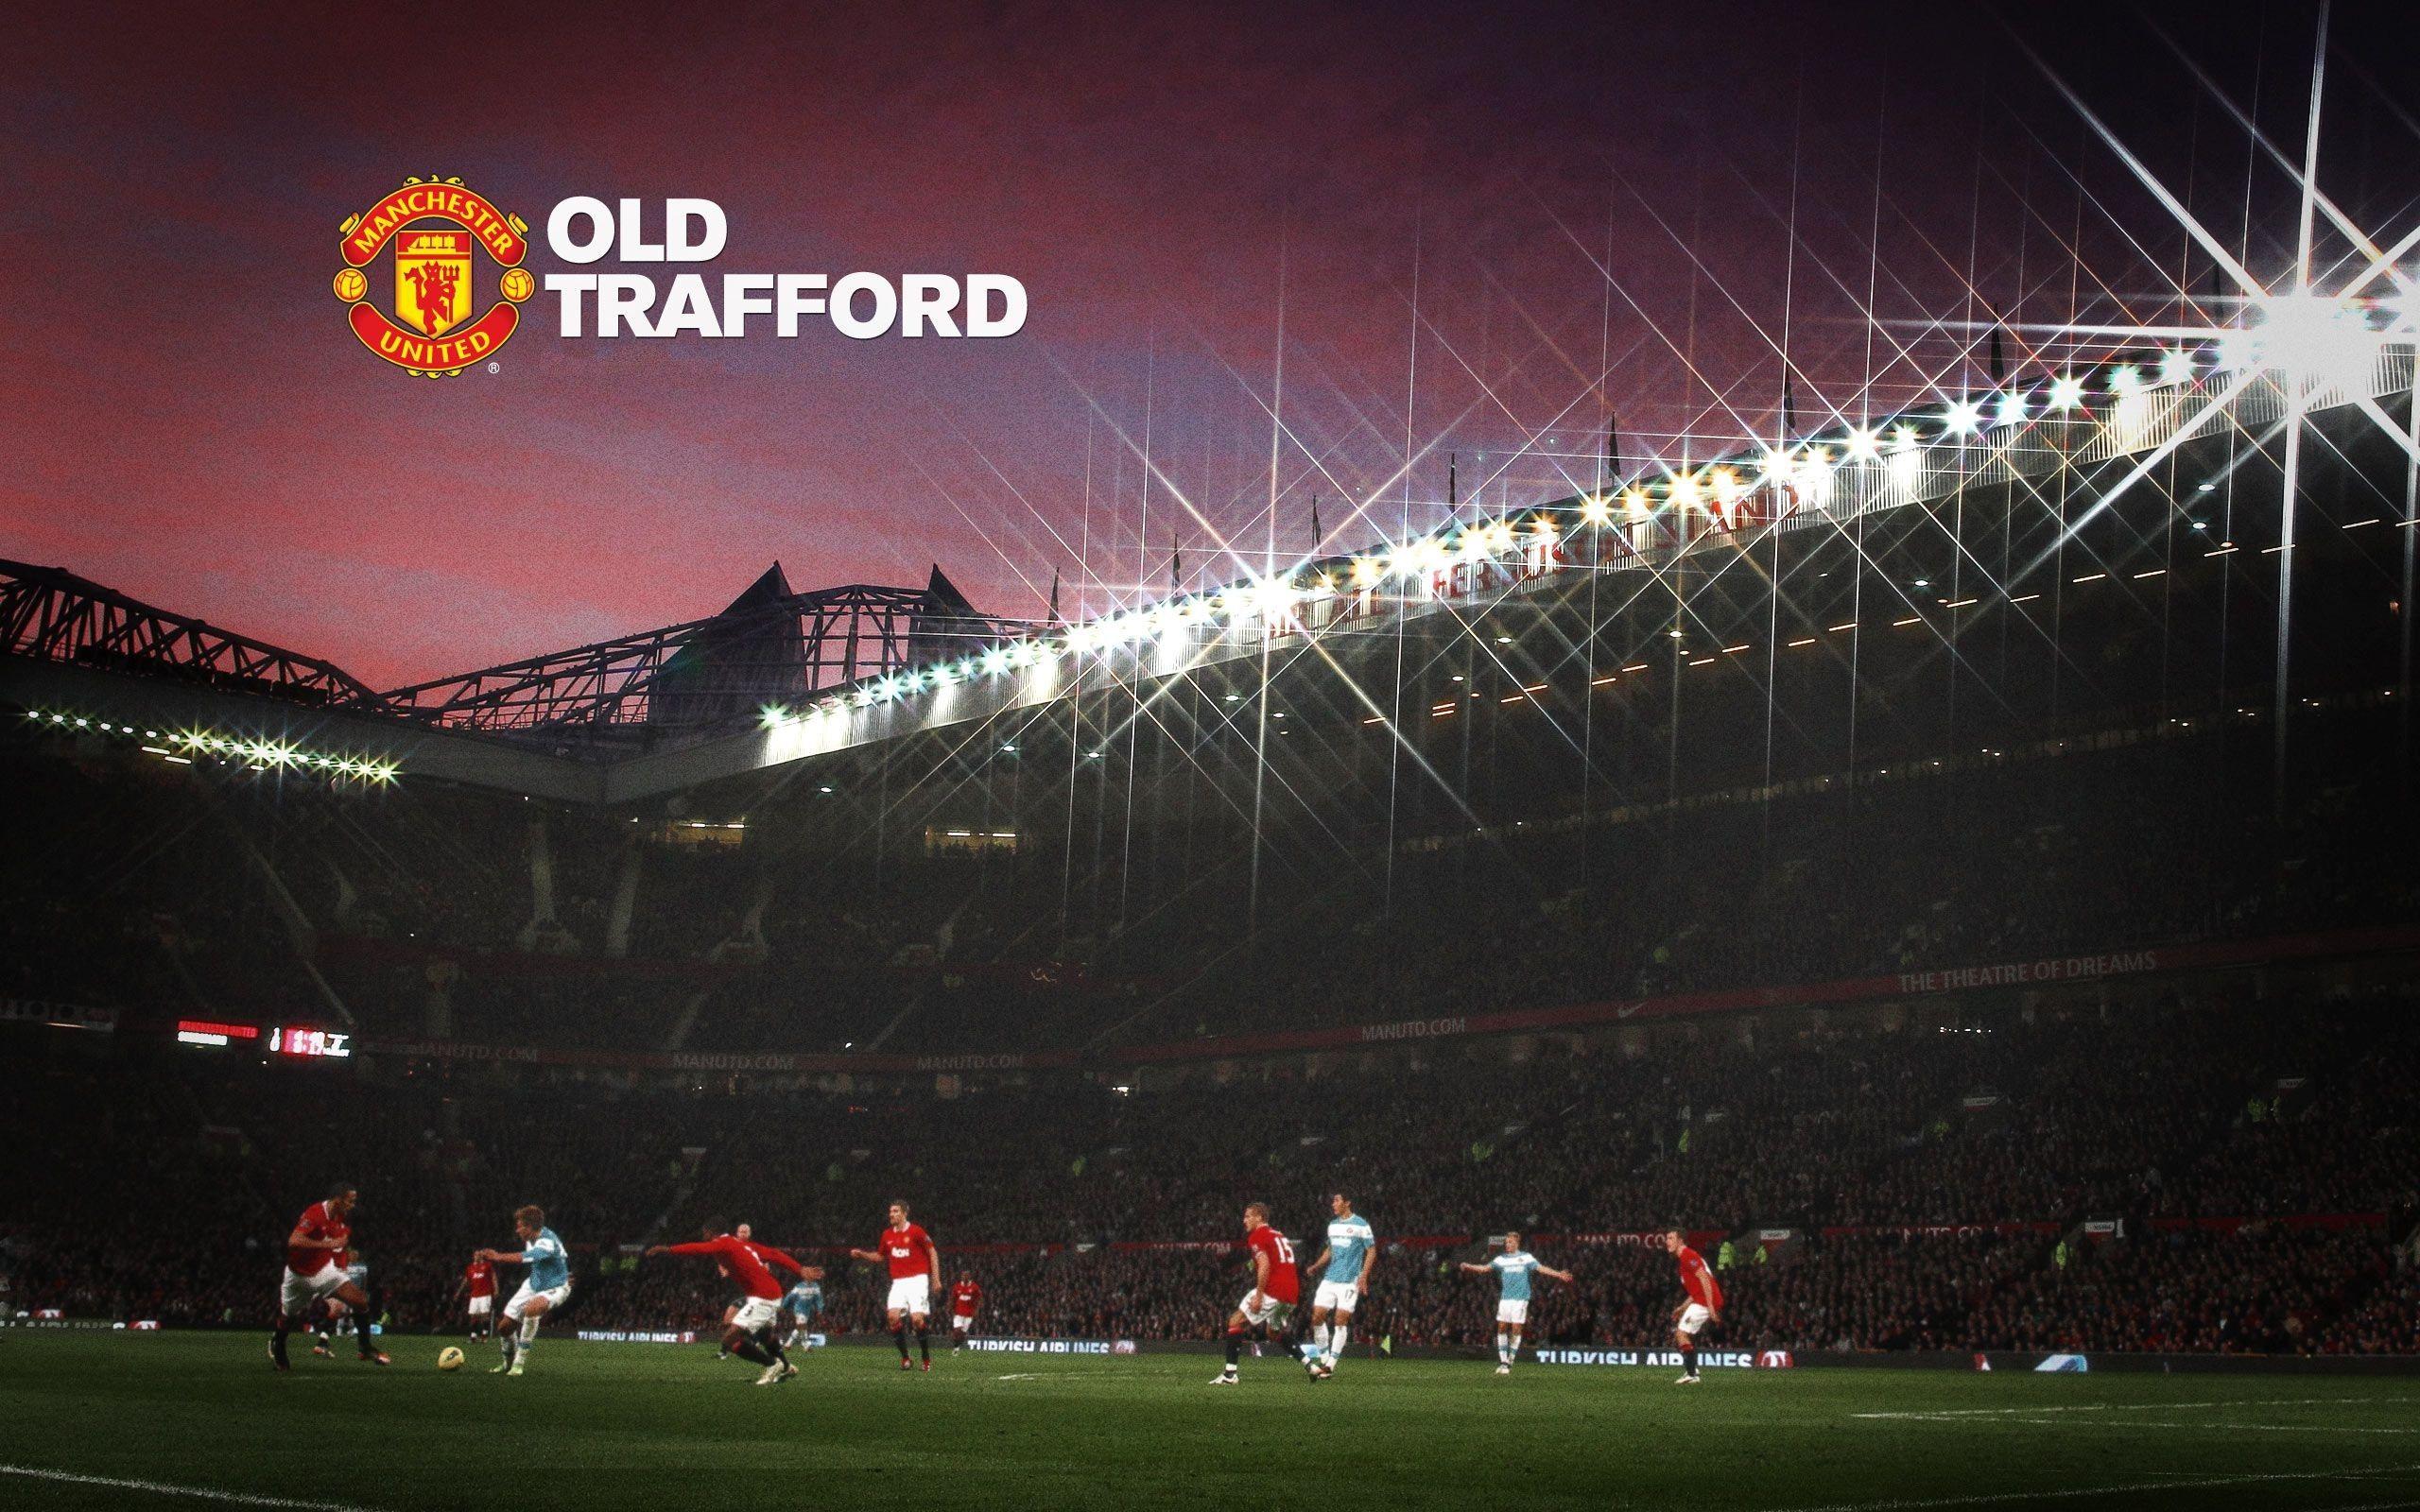 Manchester United Desktop Wallpapers - Top Free Manchester United